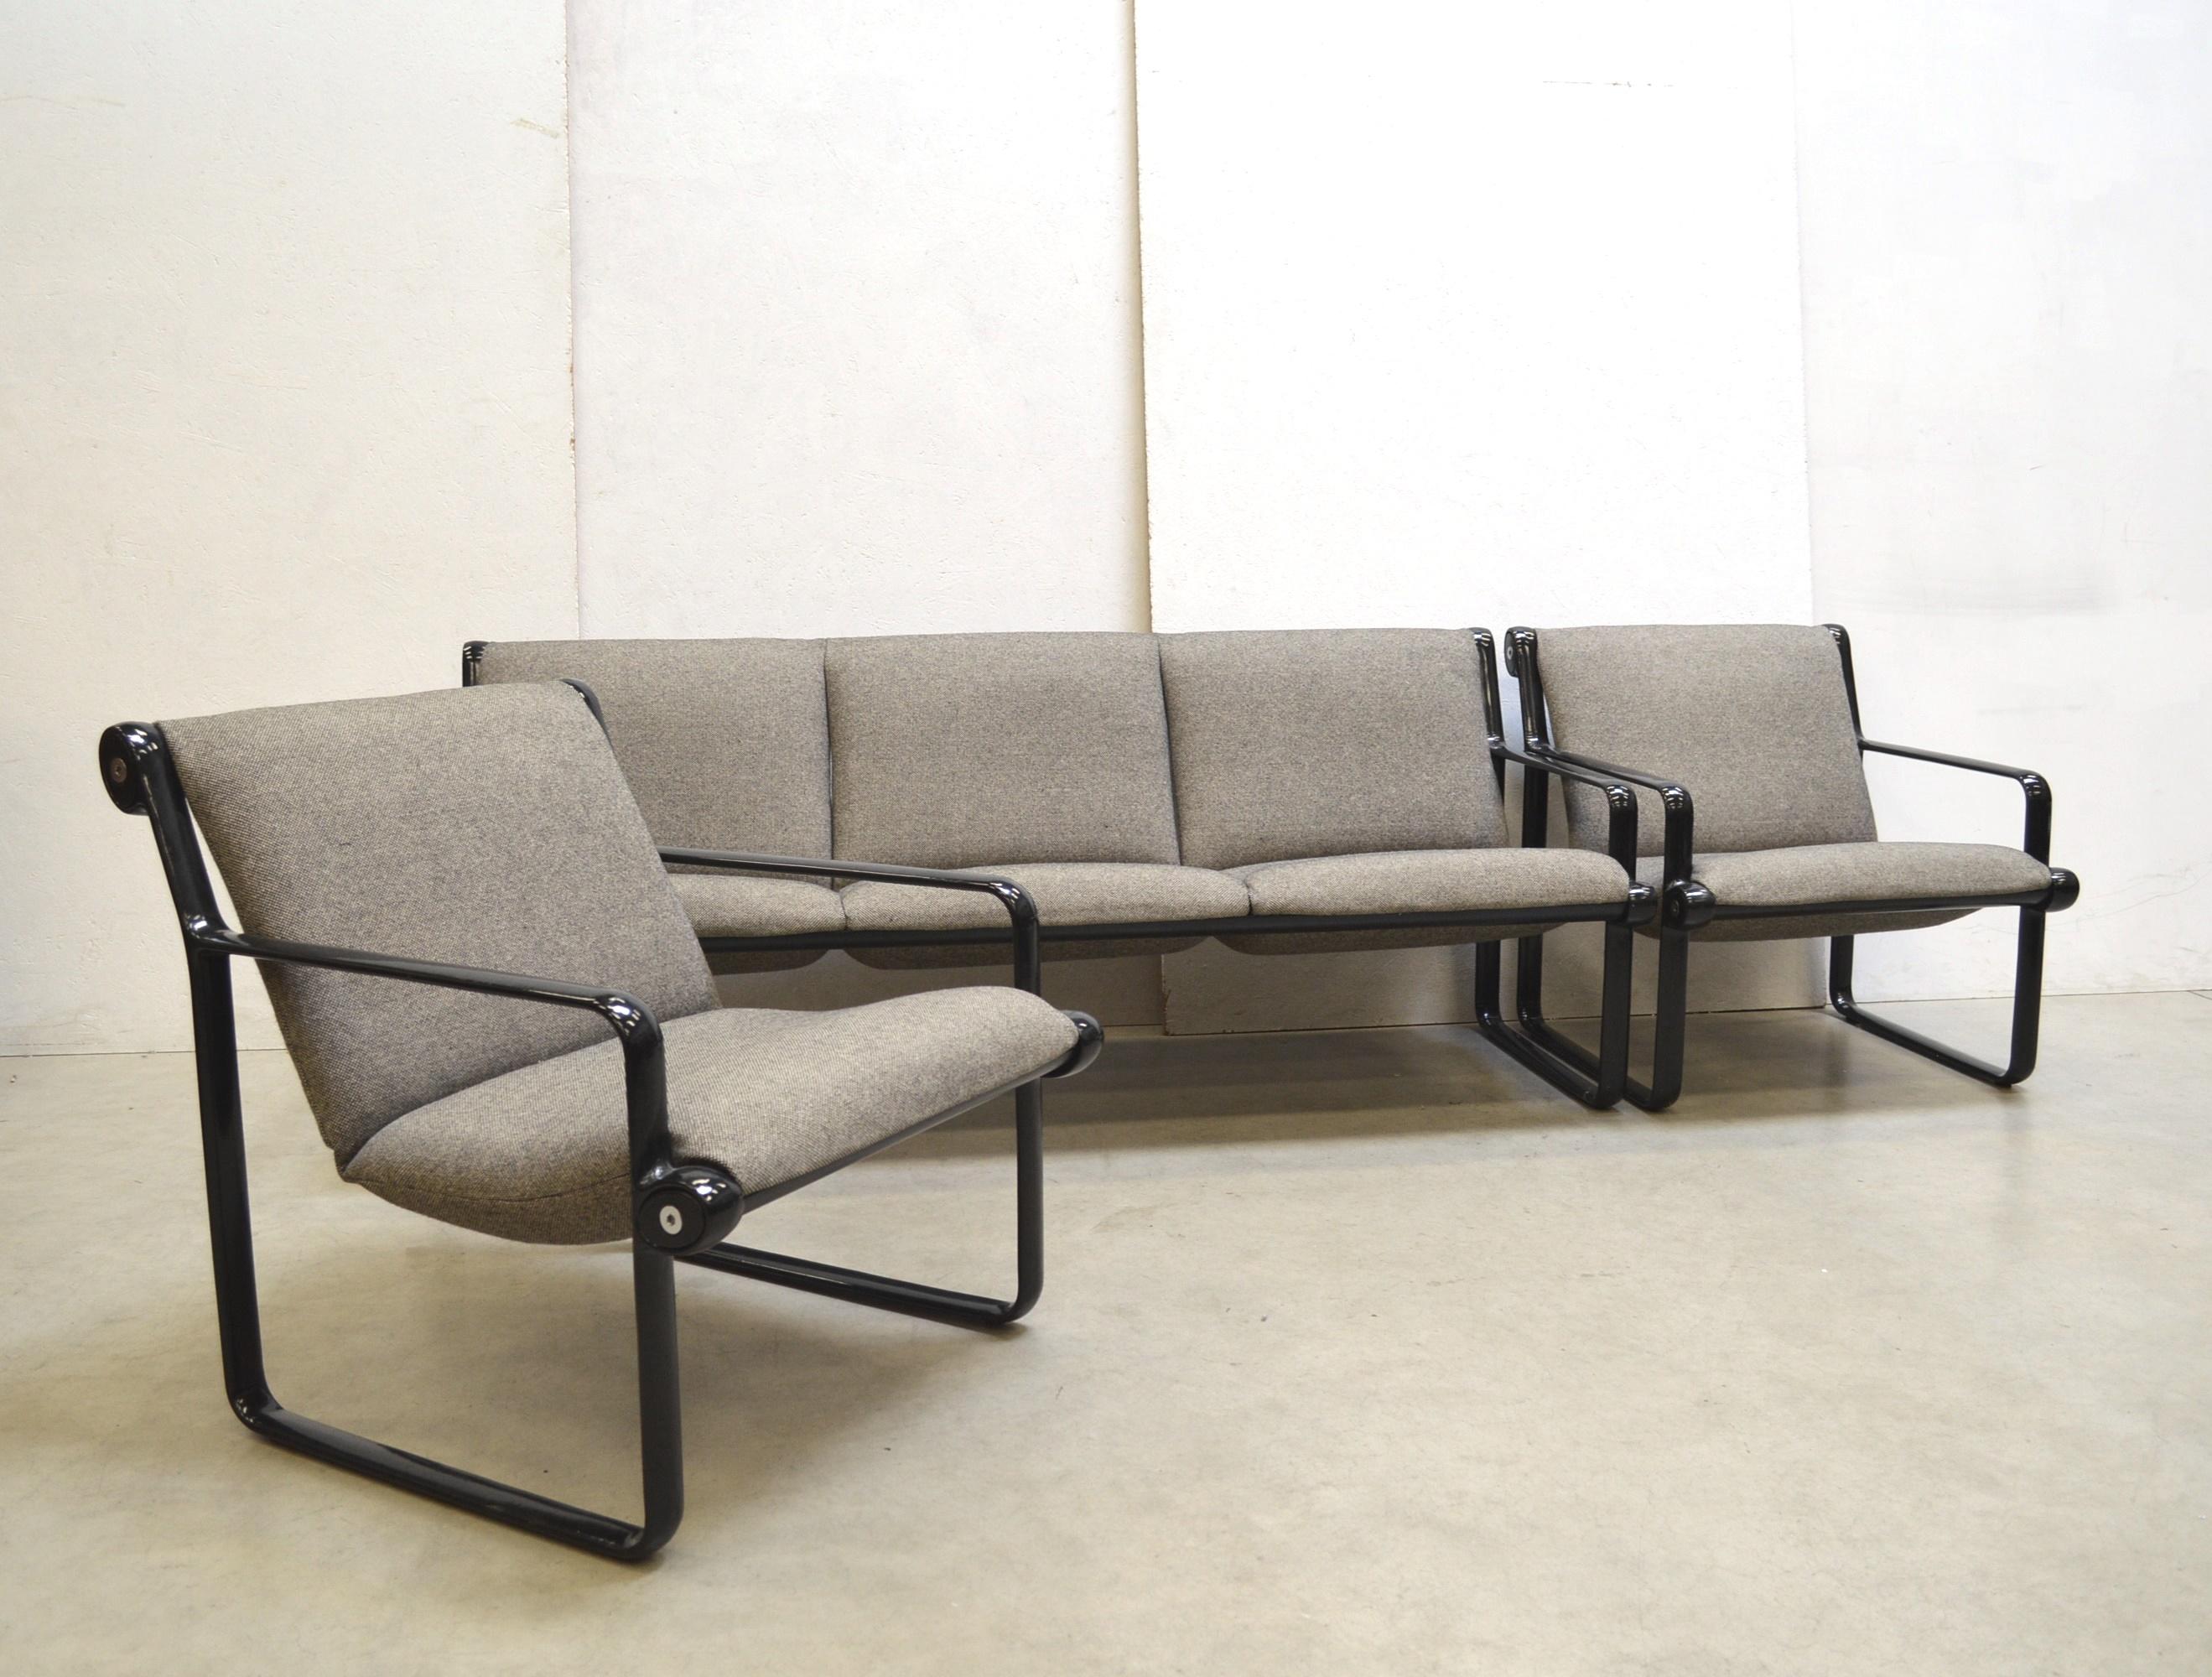 Late 20th Century Sofa & 2x Chairs Model Sling by Bruce Hannah & Andrew Morrison for Knoll 1970s